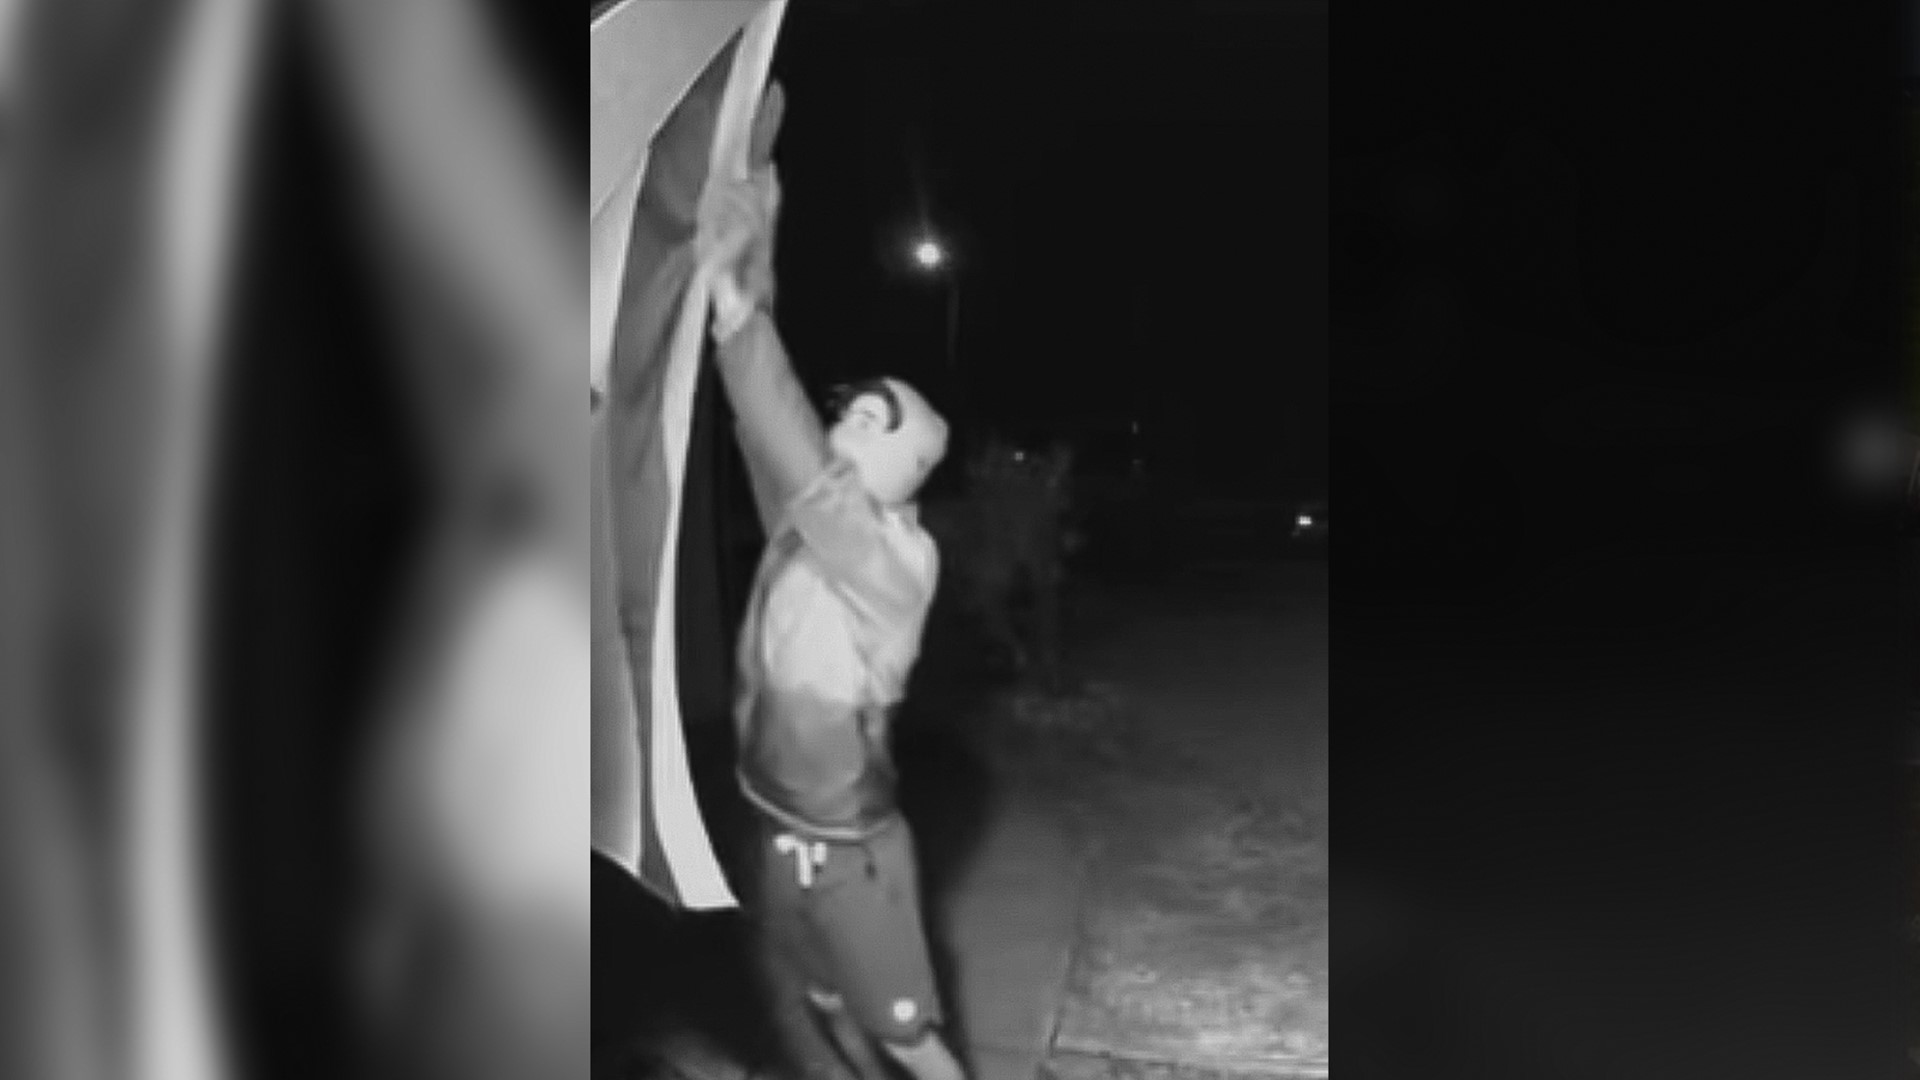 Davis police are investigating a suspected hate crime on Israeli flag at residence after someone was seen on video cutting the flag with a large knife.